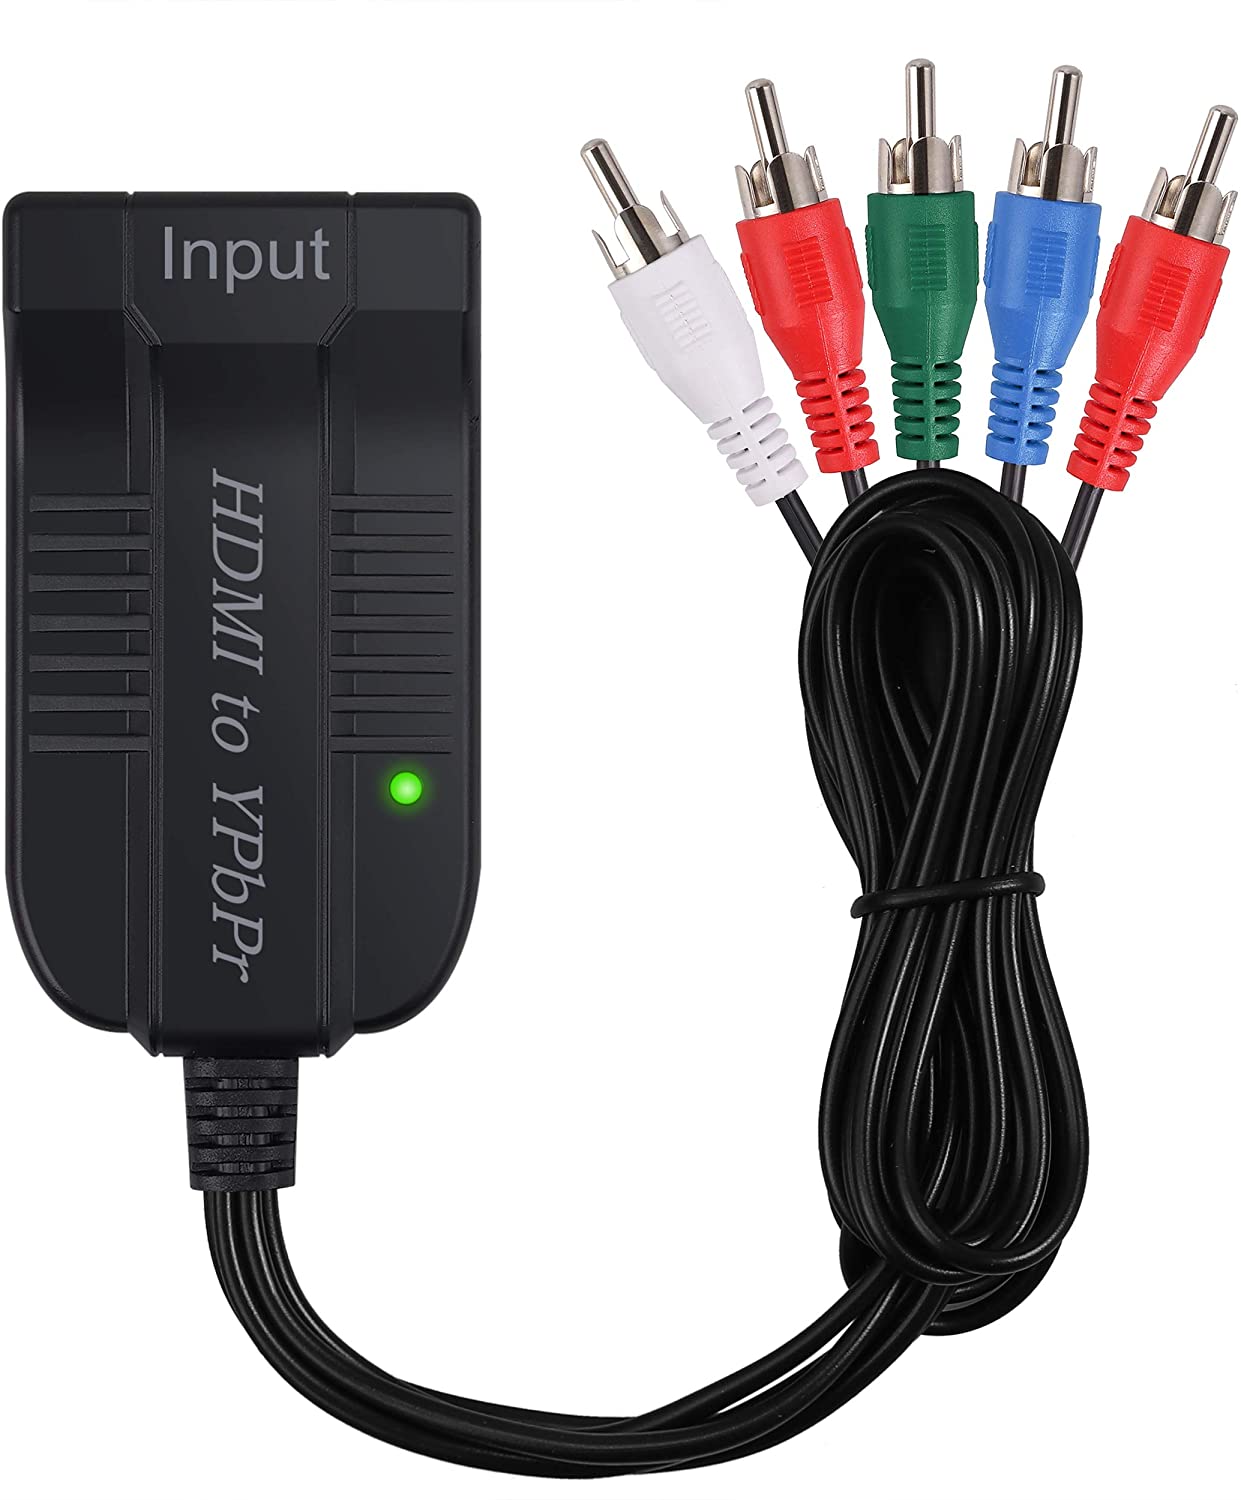 LiNKFOR HDMI to Component Converter Scaler 1080P with 60cm YPbPr Cable HDMI to YPbPr Converter.